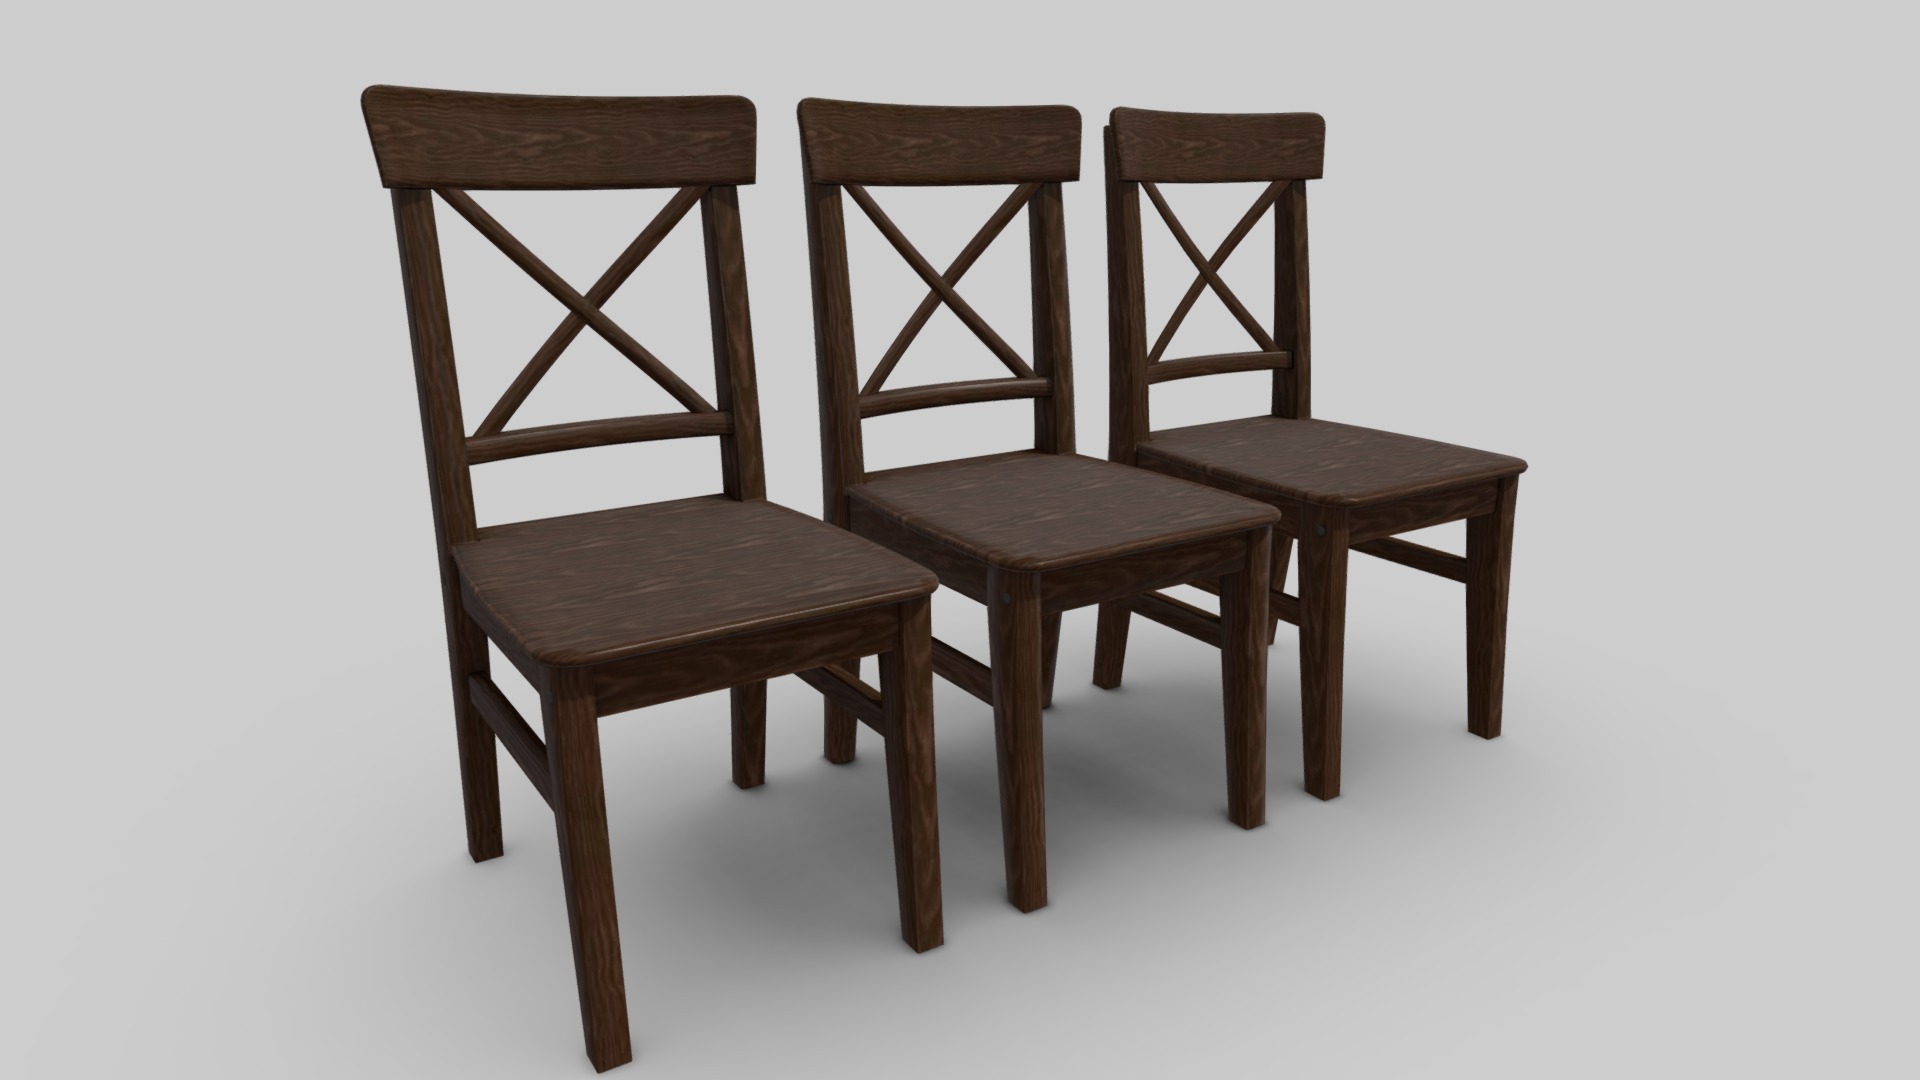 3D model Chair "Ingolf" (SHP, HP and LP) - This is a 3D model of the Chair "Ingolf" (SHP, HP and LP). The 3D model is about a group of wooden chairs.